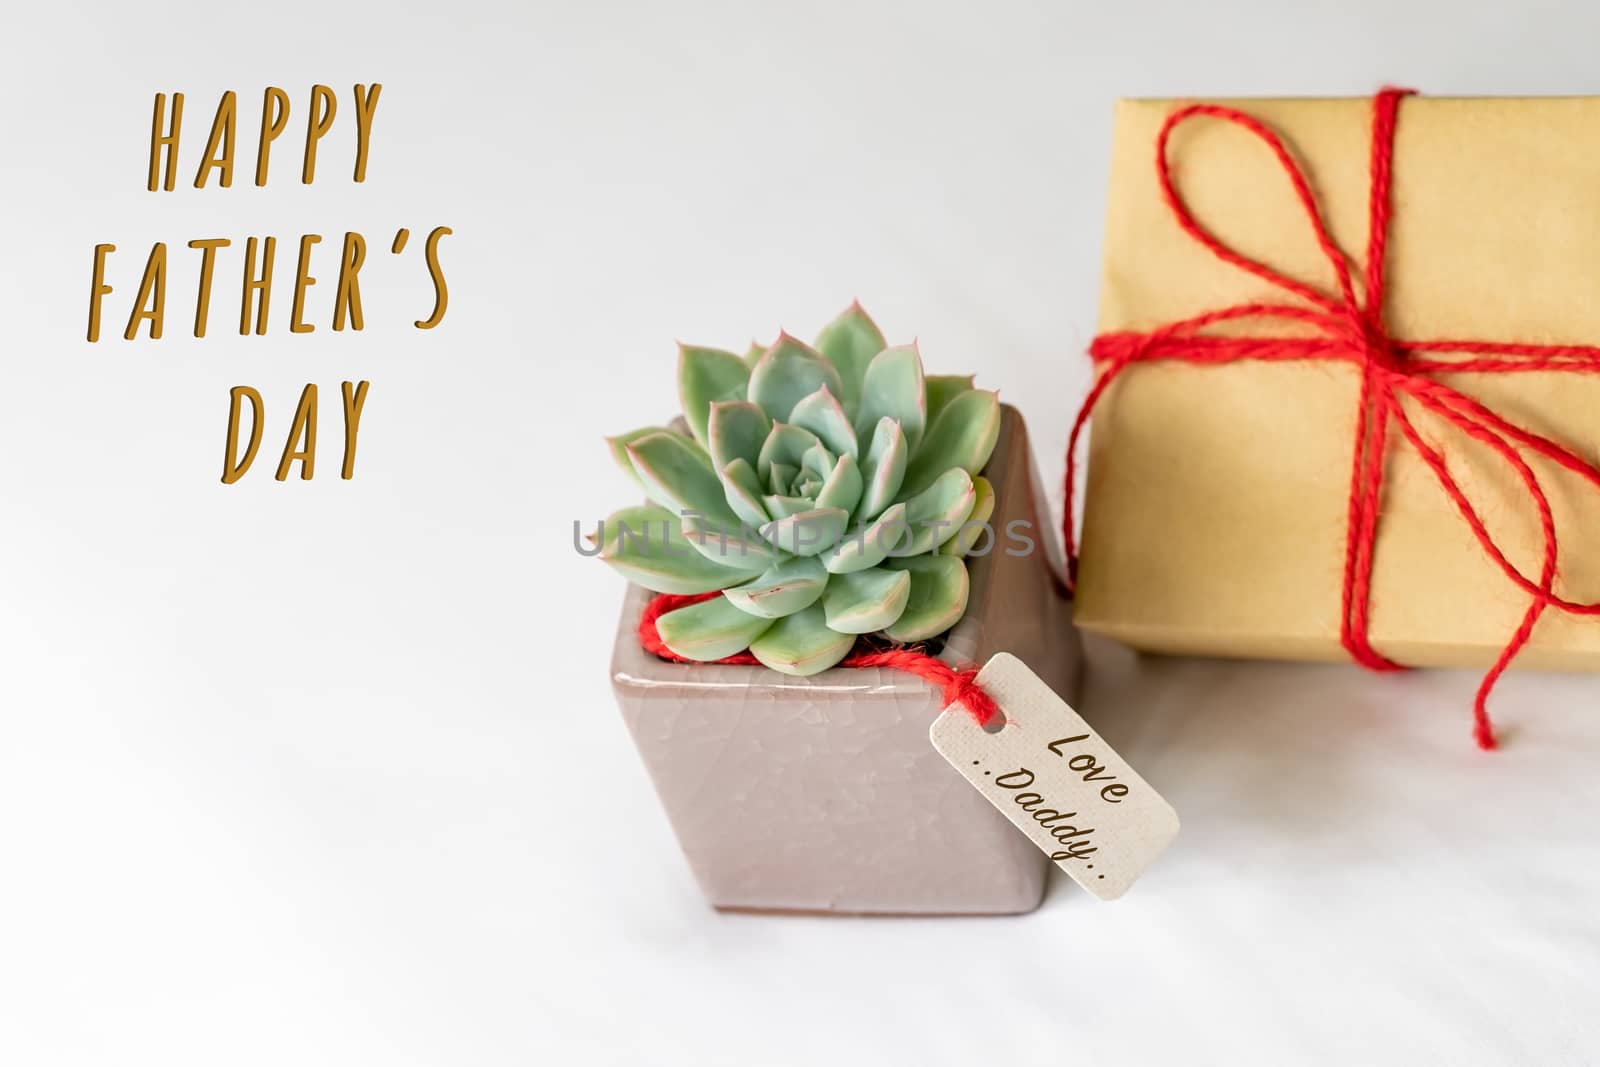 Happy father's day concept. Gift box and green cactus, paper tag by psodaz